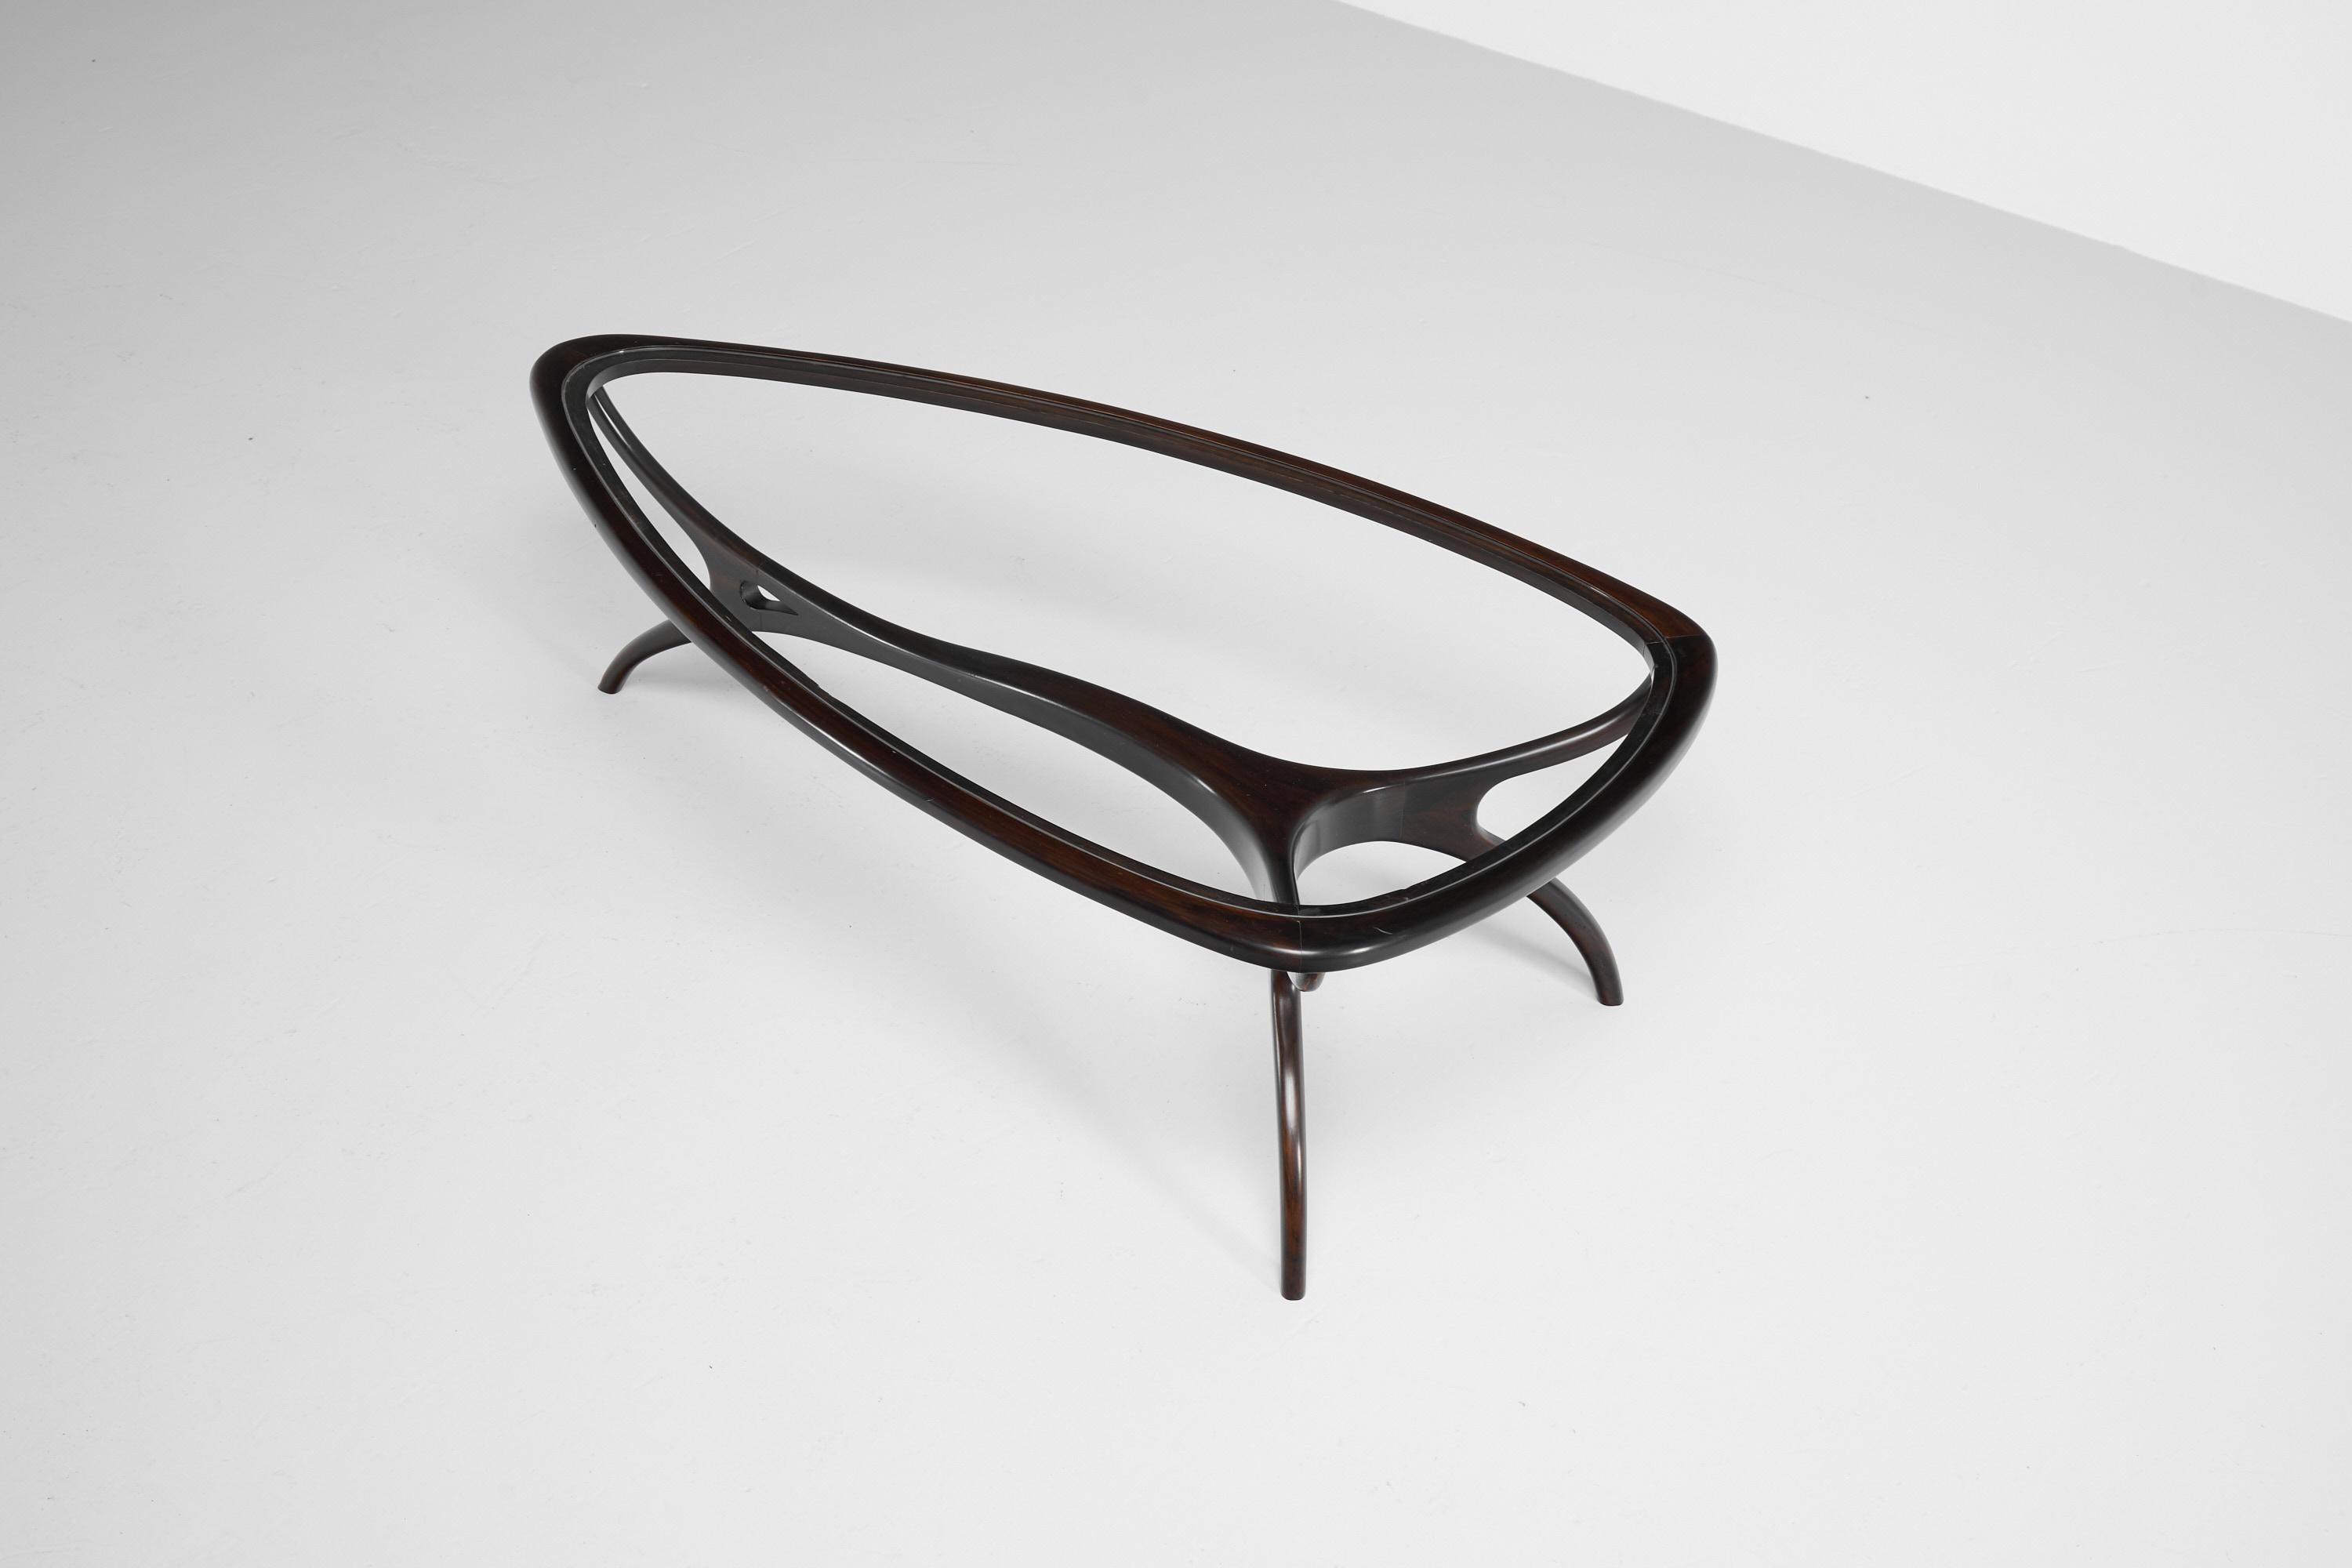 Striking coffee table designed by Giuseppe Scapinelli and manufactured in his workshop in Brazil, 1950. This sculptural shaped coffee table is made of very dark and deep coloured rosewood. It has a somewhat oval shape and 3 very elegant shaped legs.